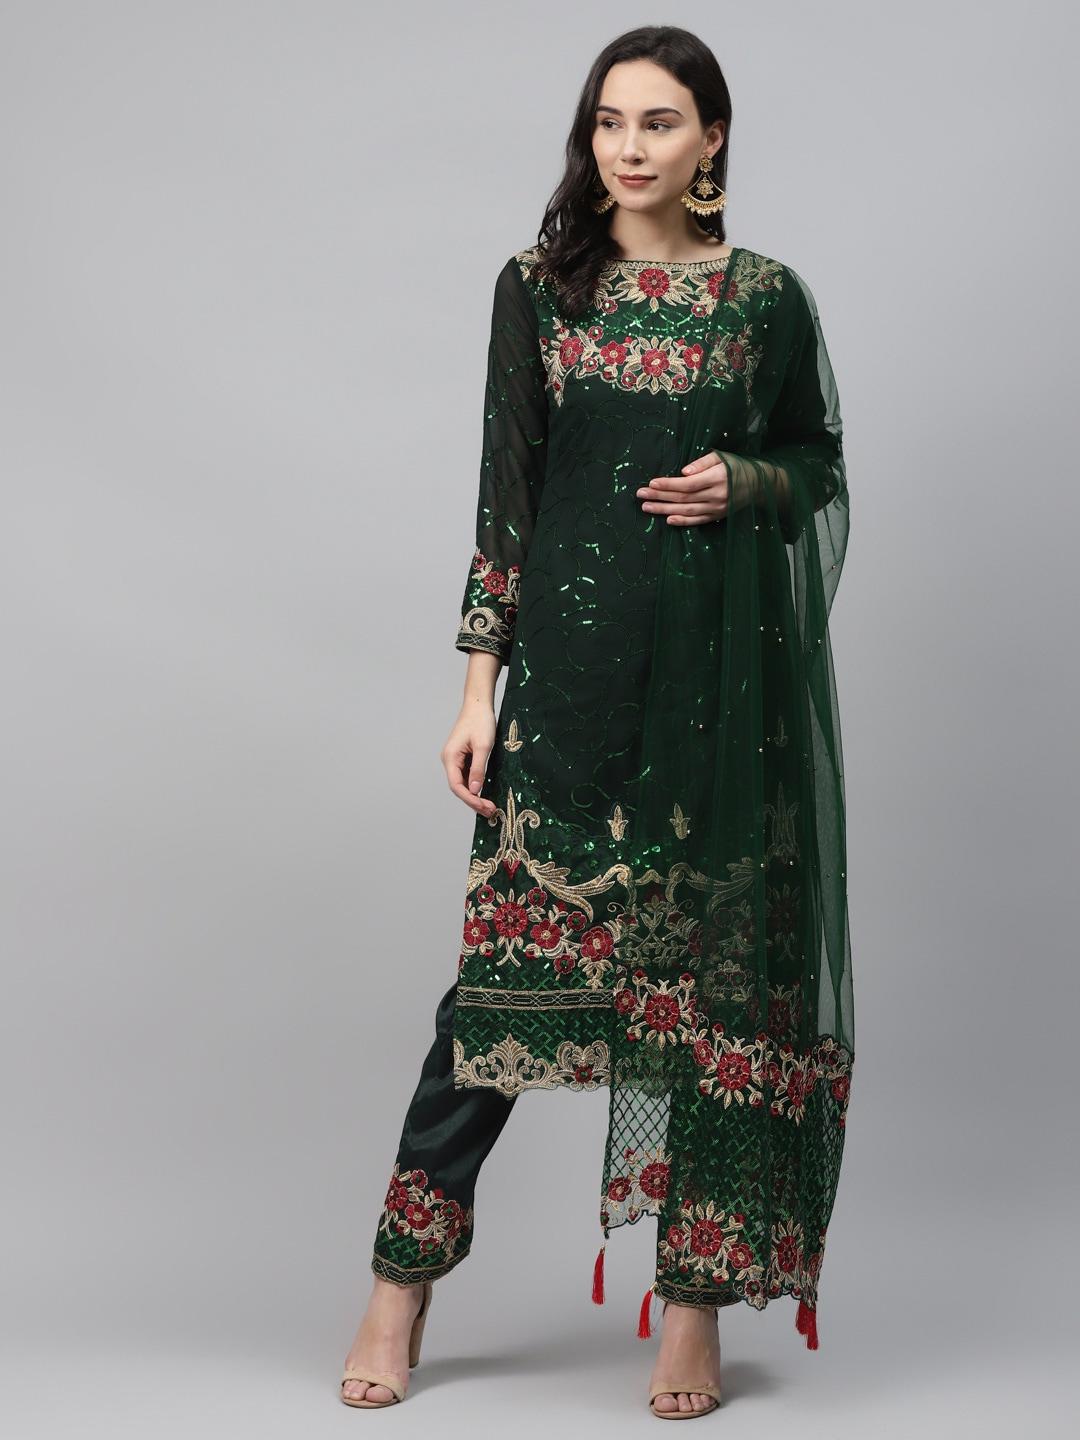 Readiprint Fashions Green & Golden Sequinned Semi-Stitched Dress Material